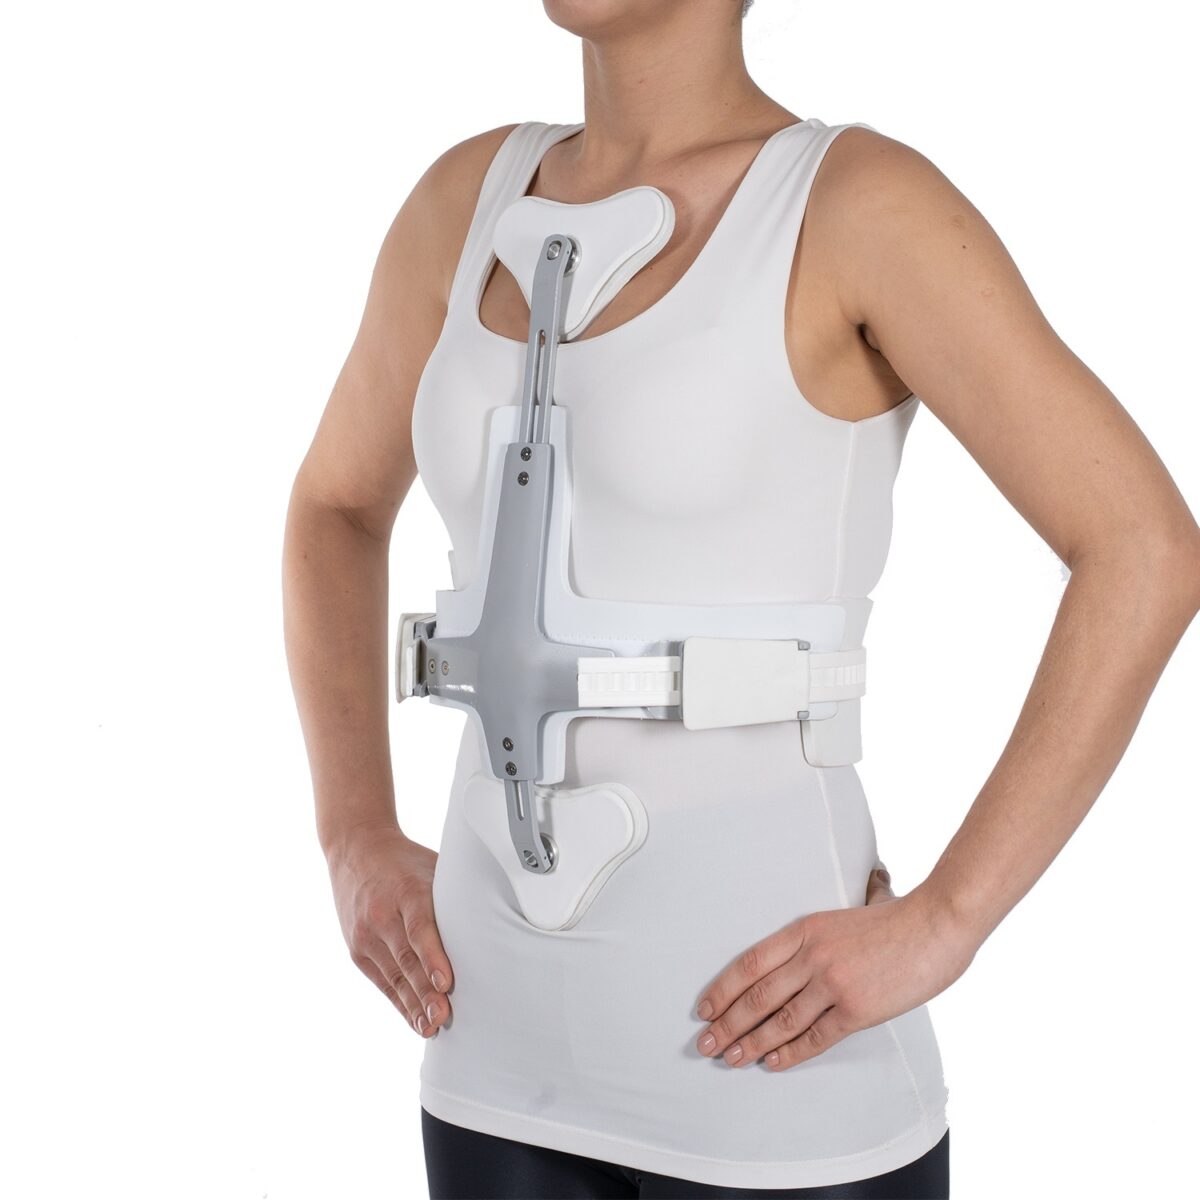 wingmed orthopedic equipments W449 hiperextension corset 3 points 69